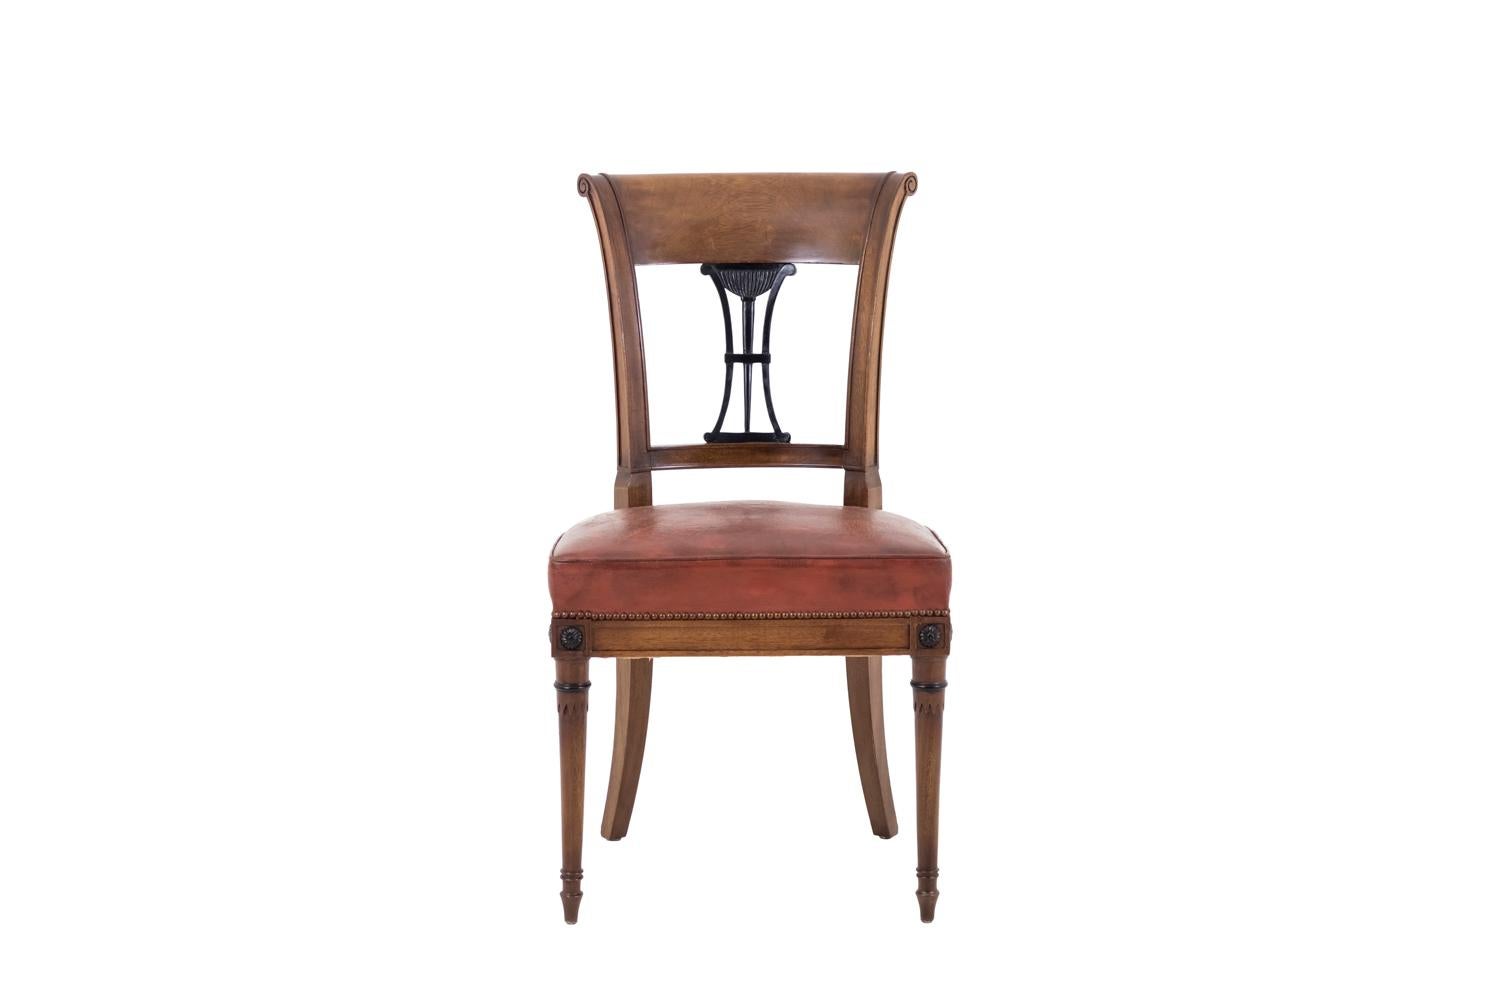 French Set of 6 Directoire Style Chairs in Mahogany, Early 20th Century